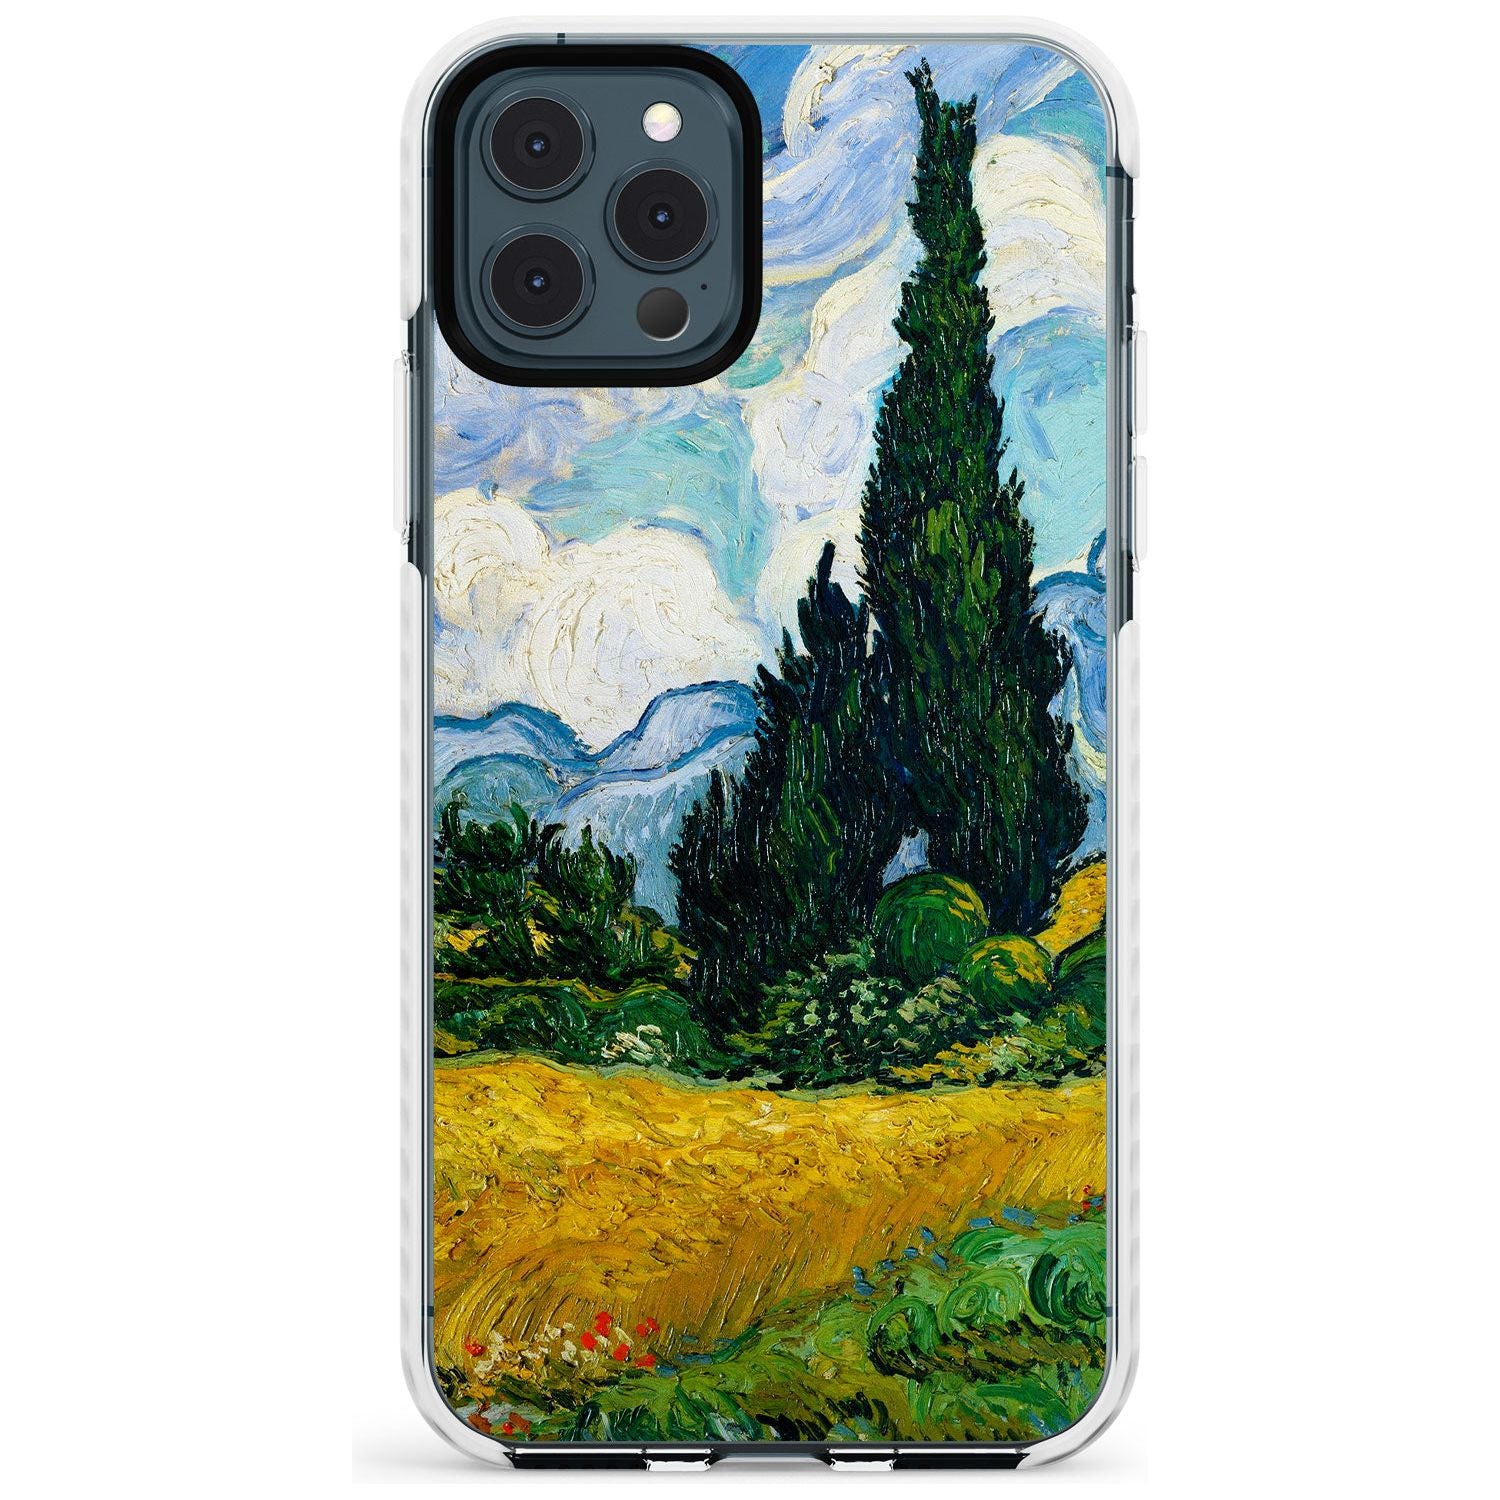 Wheat Field with Cypresses by Vincent Van Gogh Slim TPU Phone Case for iPhone 11 Pro Max